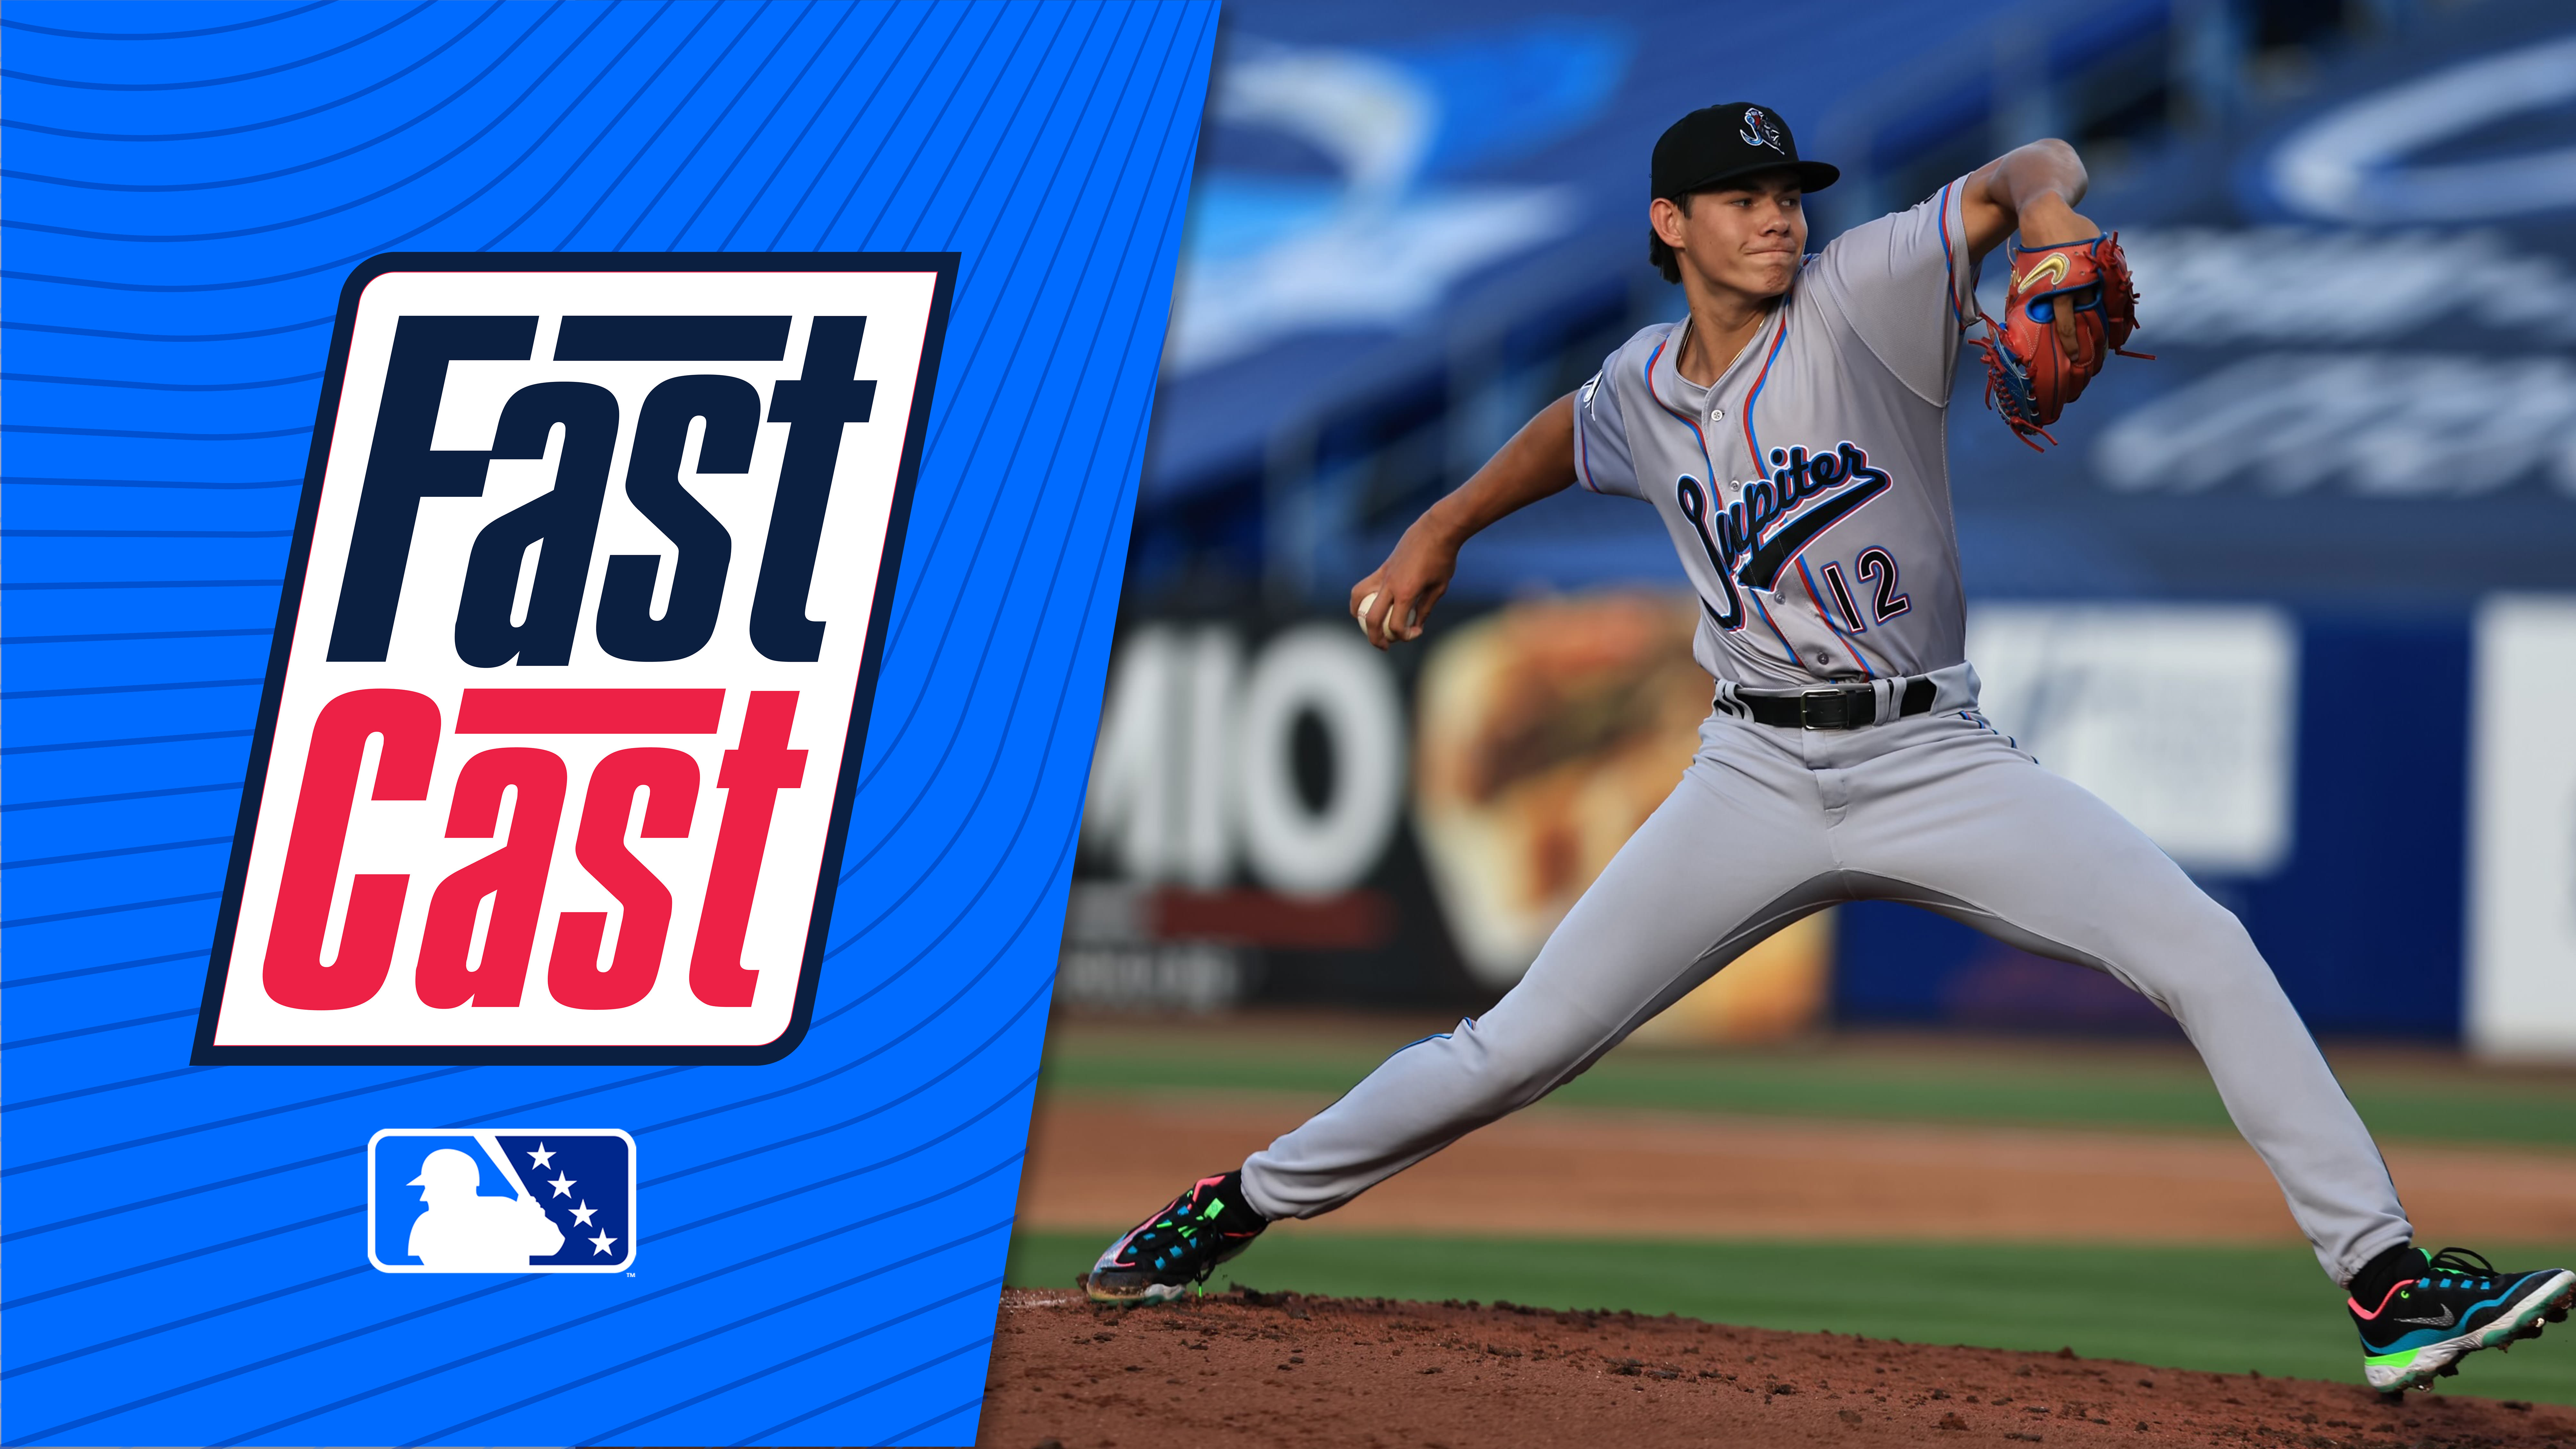 A photo of Noble Meyer pitching next to the FastCast logo